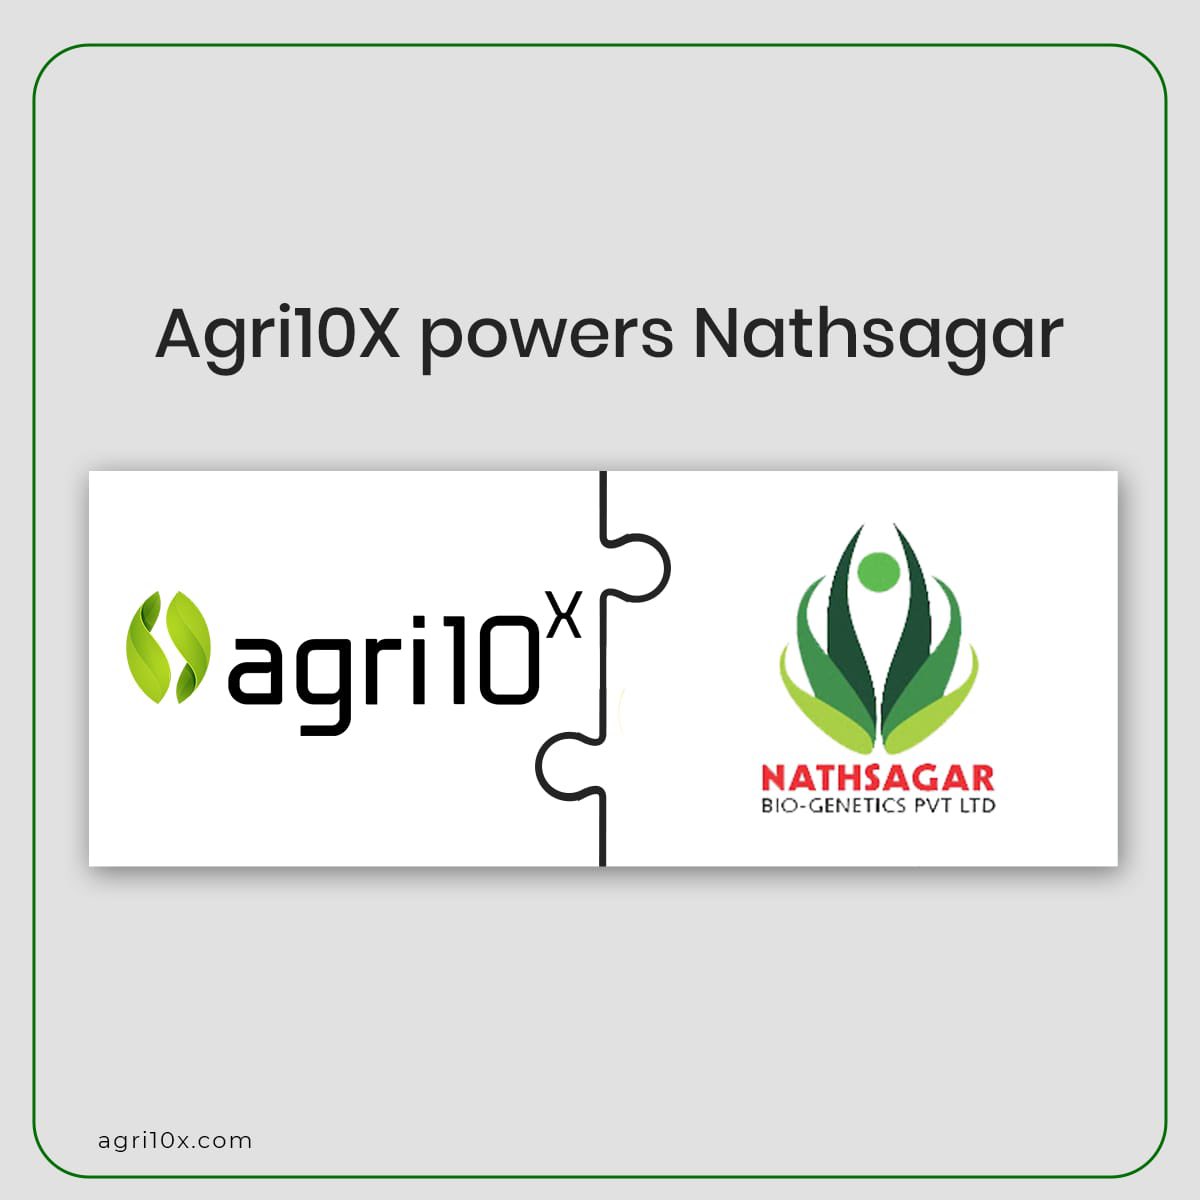 Agri10x is proud to announce our strategic partnership with Nathsagar, Bio-Genetics Pvt Ltd. We believe this association will help us serve the farmers community better! #Agri10xCollaboration #Partnership #Agritech #Announcement